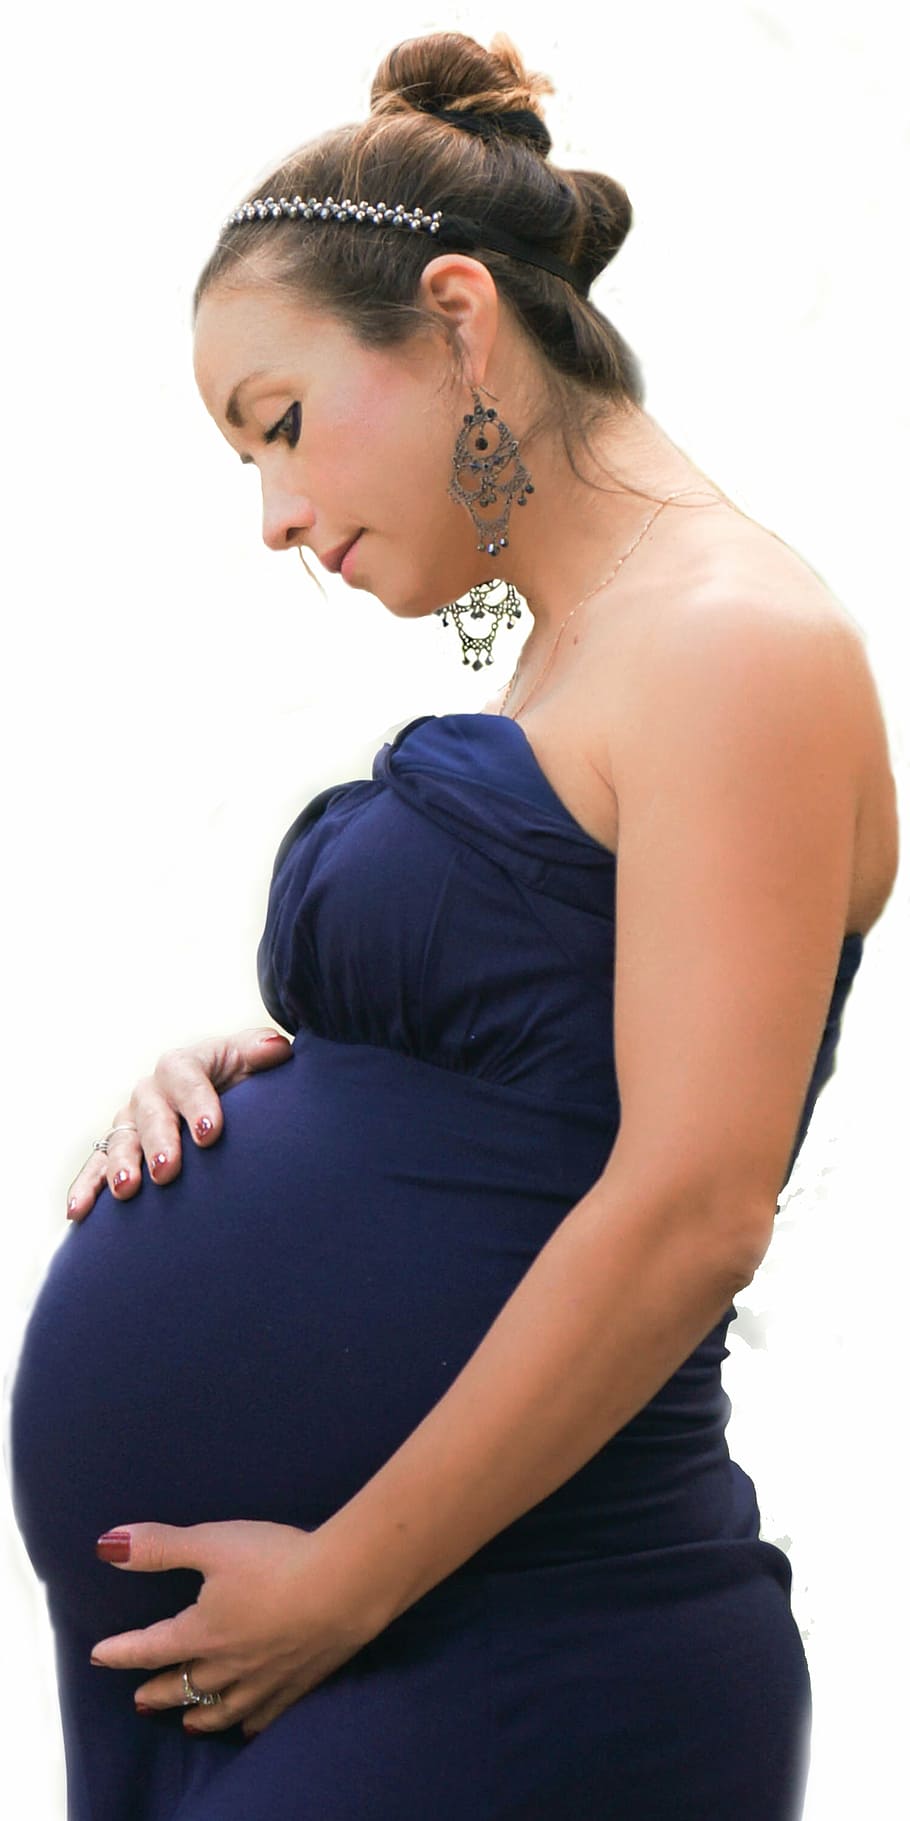 woman, holding, belly, women, pregnancy, maternal, mama, pregnant, female, future mom